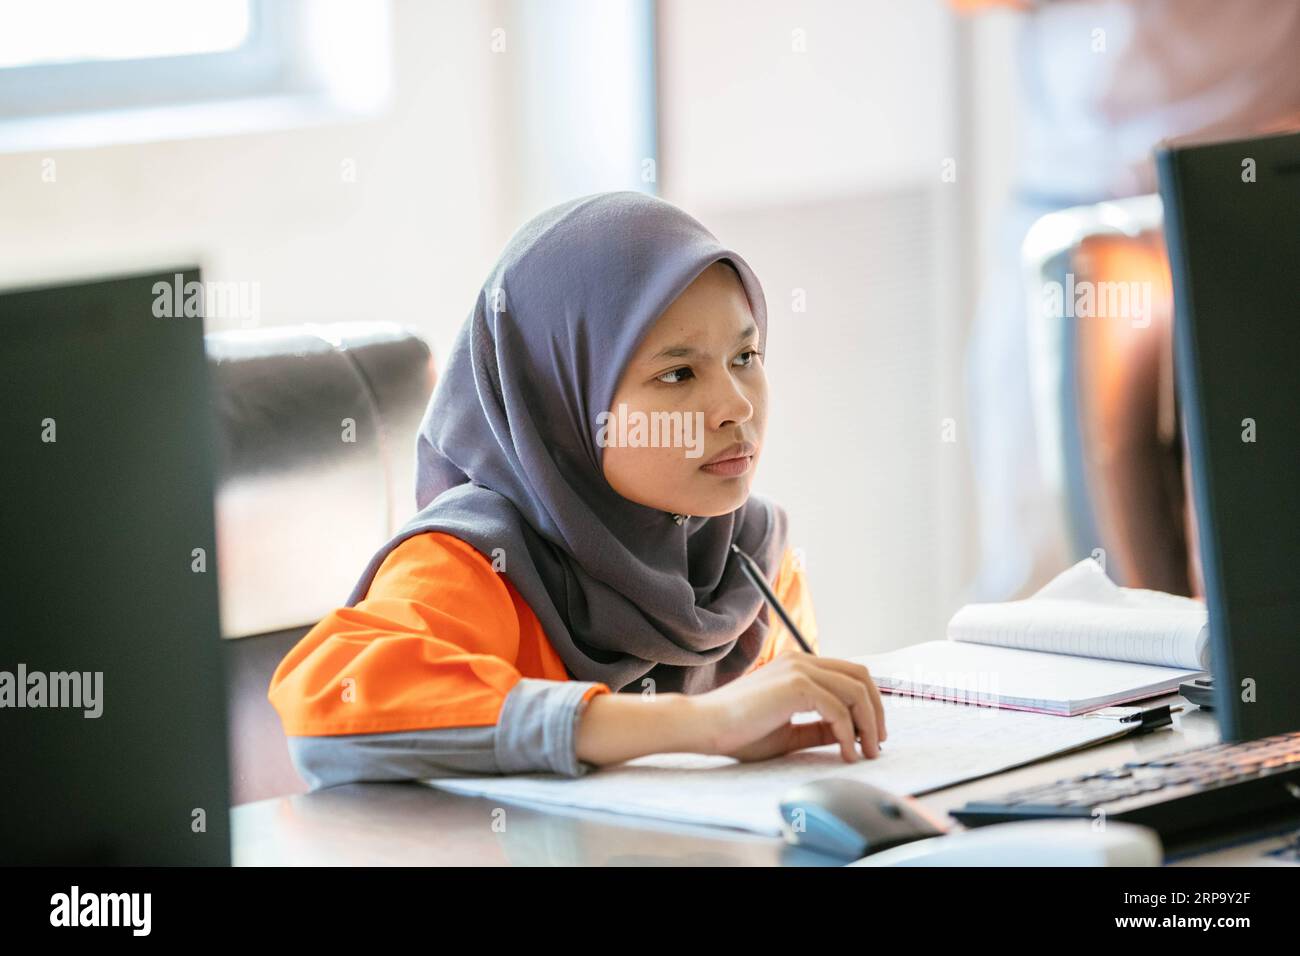 (190419) -- KUALA LUMPUR, April 19, 2019 (Xinhua) -- Nur Fatihah Binti Zakaria works at the coal preparation central control room at the Alliance Steel coking plant in Kuantan, Malaysia, April 15, 2019. At the beginning Malaysian college graduate Nur Fatihah Binti Zakaria had no idea about what steel production was all about, nor did she have any knowledge about speaking Chinese. But after almost two years working at the Alliance Steel at the Malaysia, China Kuantan Industrial Park, she now can perform her job skillfully, even making fun of her colleagues from China that not all of them speak Stock Photo